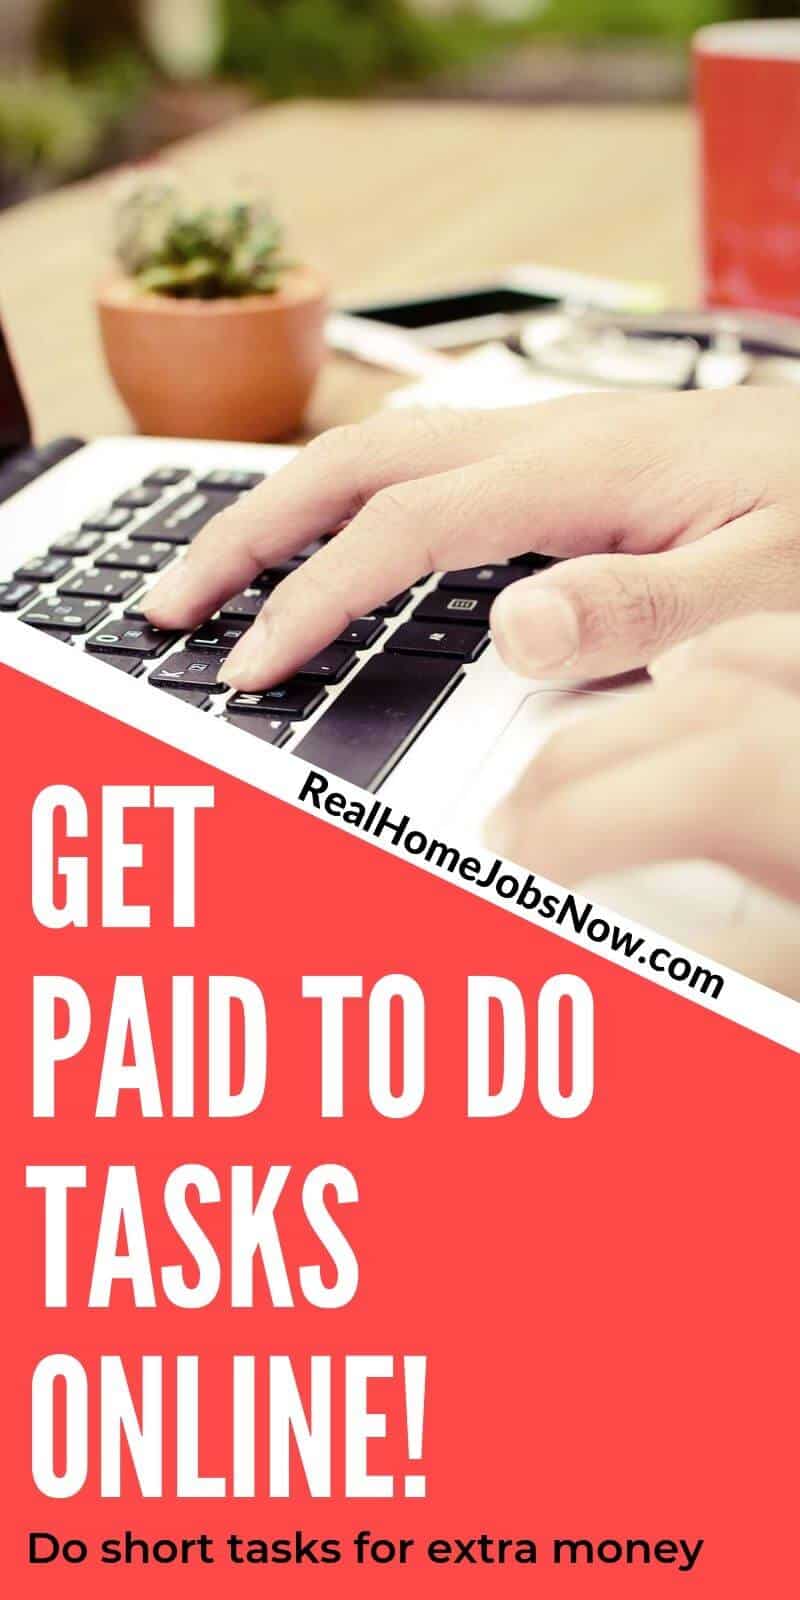 If you've been looking for an easy, flexible way to make money online from home, this is it! Short task sites, also known as micro jobs or task jobs, are great way to earn extra money especially if you have no experience or if you're short on time! These small jobs are perfect for moms to do during down time! #workfromhome #workfromhomejobs #workfromhomecompanies #workfromhomeonline #workathome #workathomejobs #wahm #onlinejobs #remotejobs #remotework #moneyfromhome